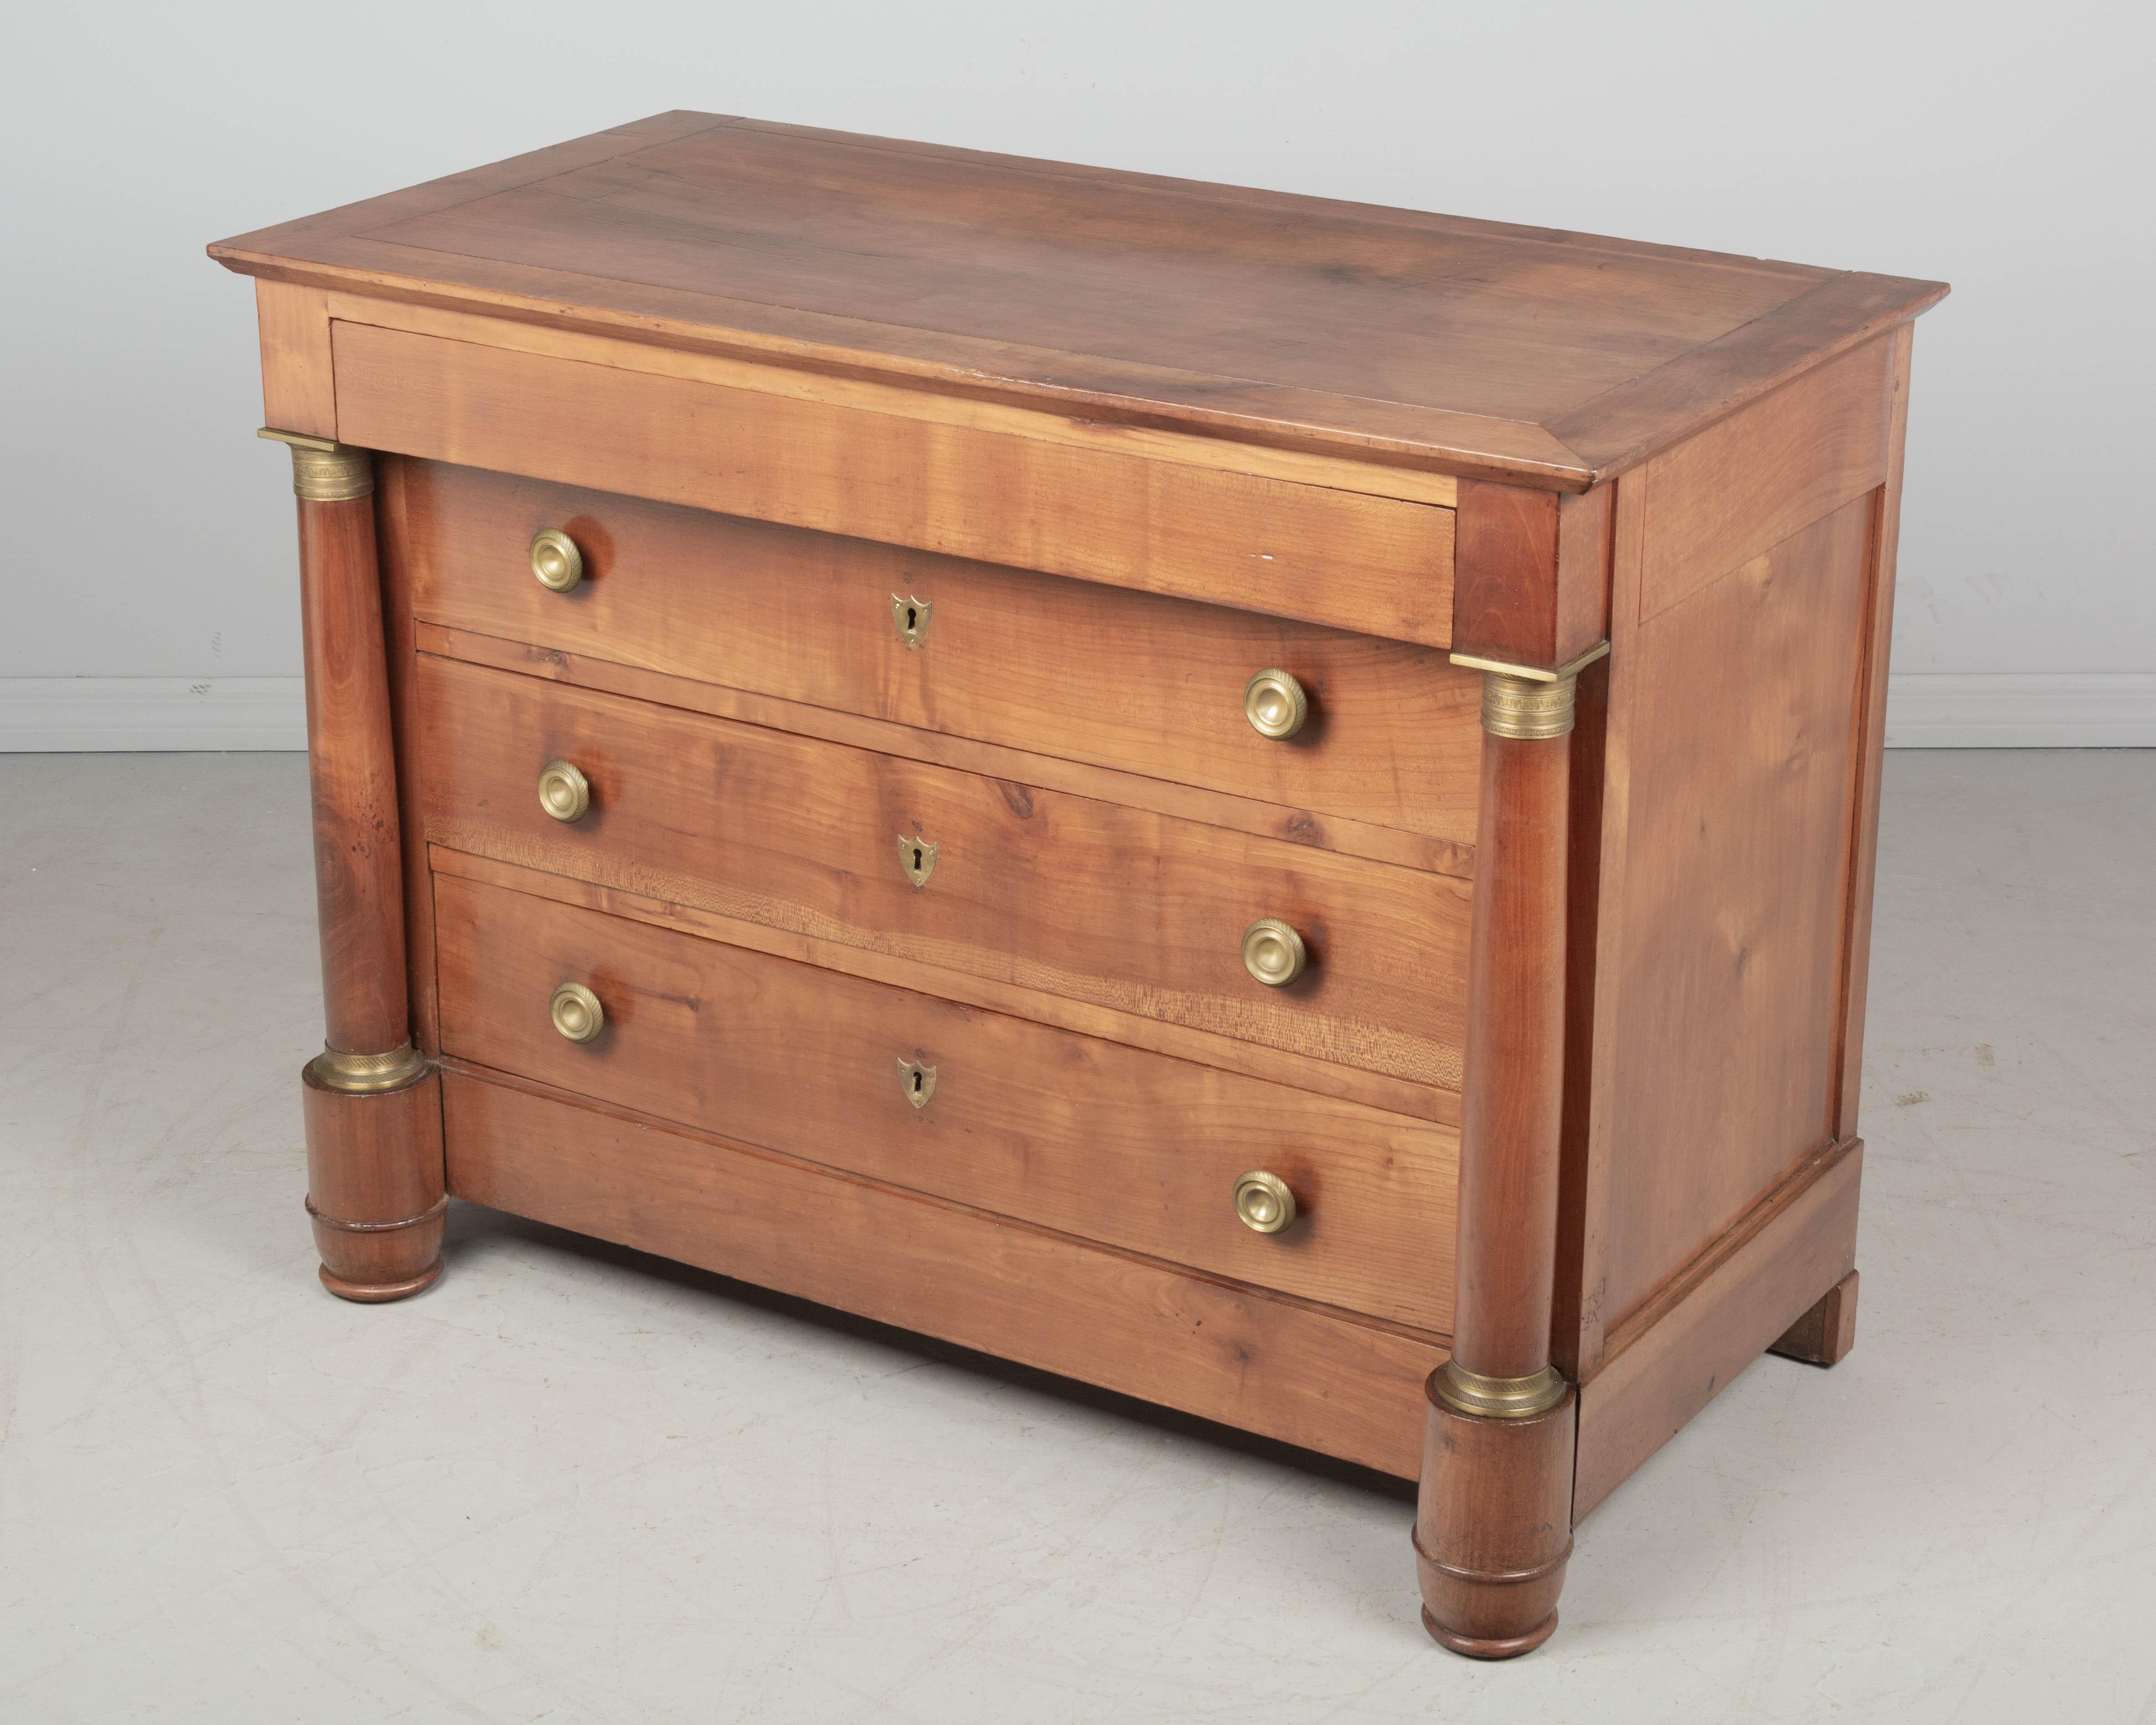 19th Century French Empire Commode or Chest of Drawers In Good Condition For Sale In Winter Park, FL